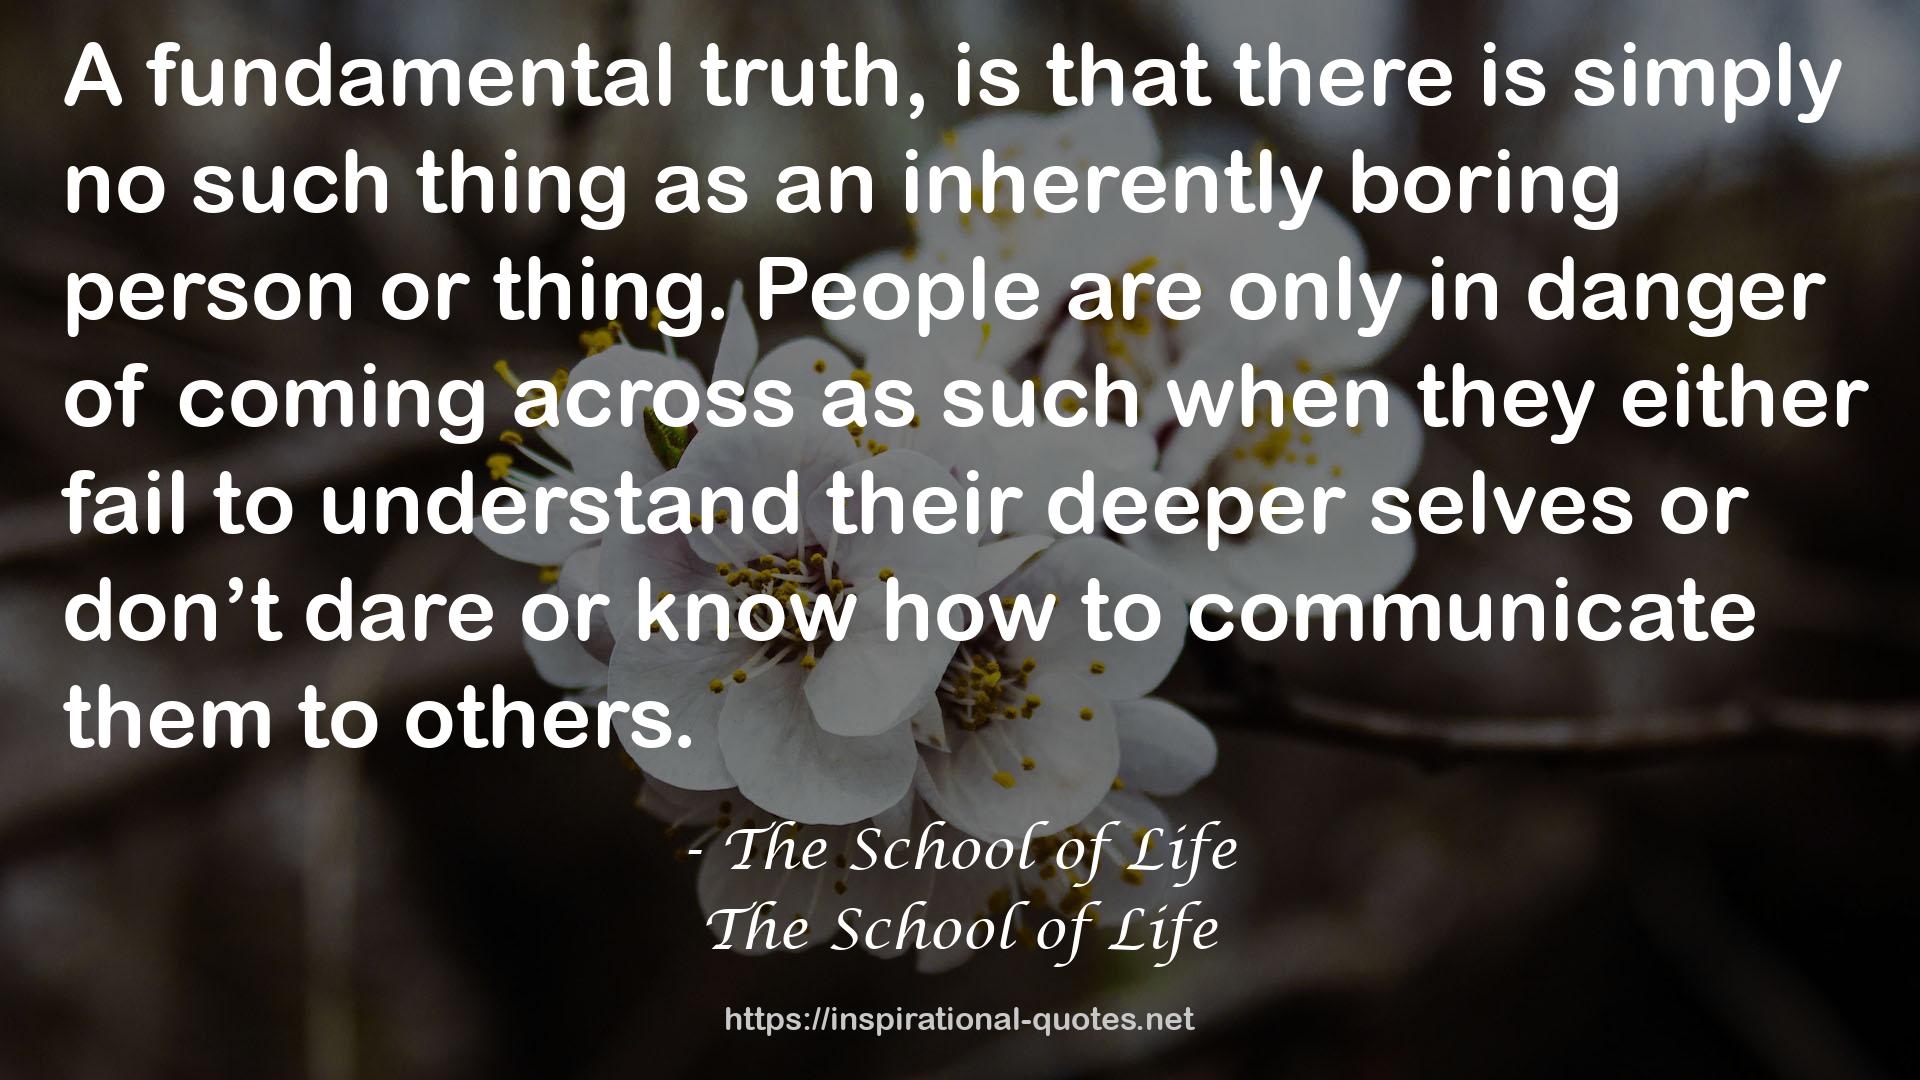 The School of Life QUOTES